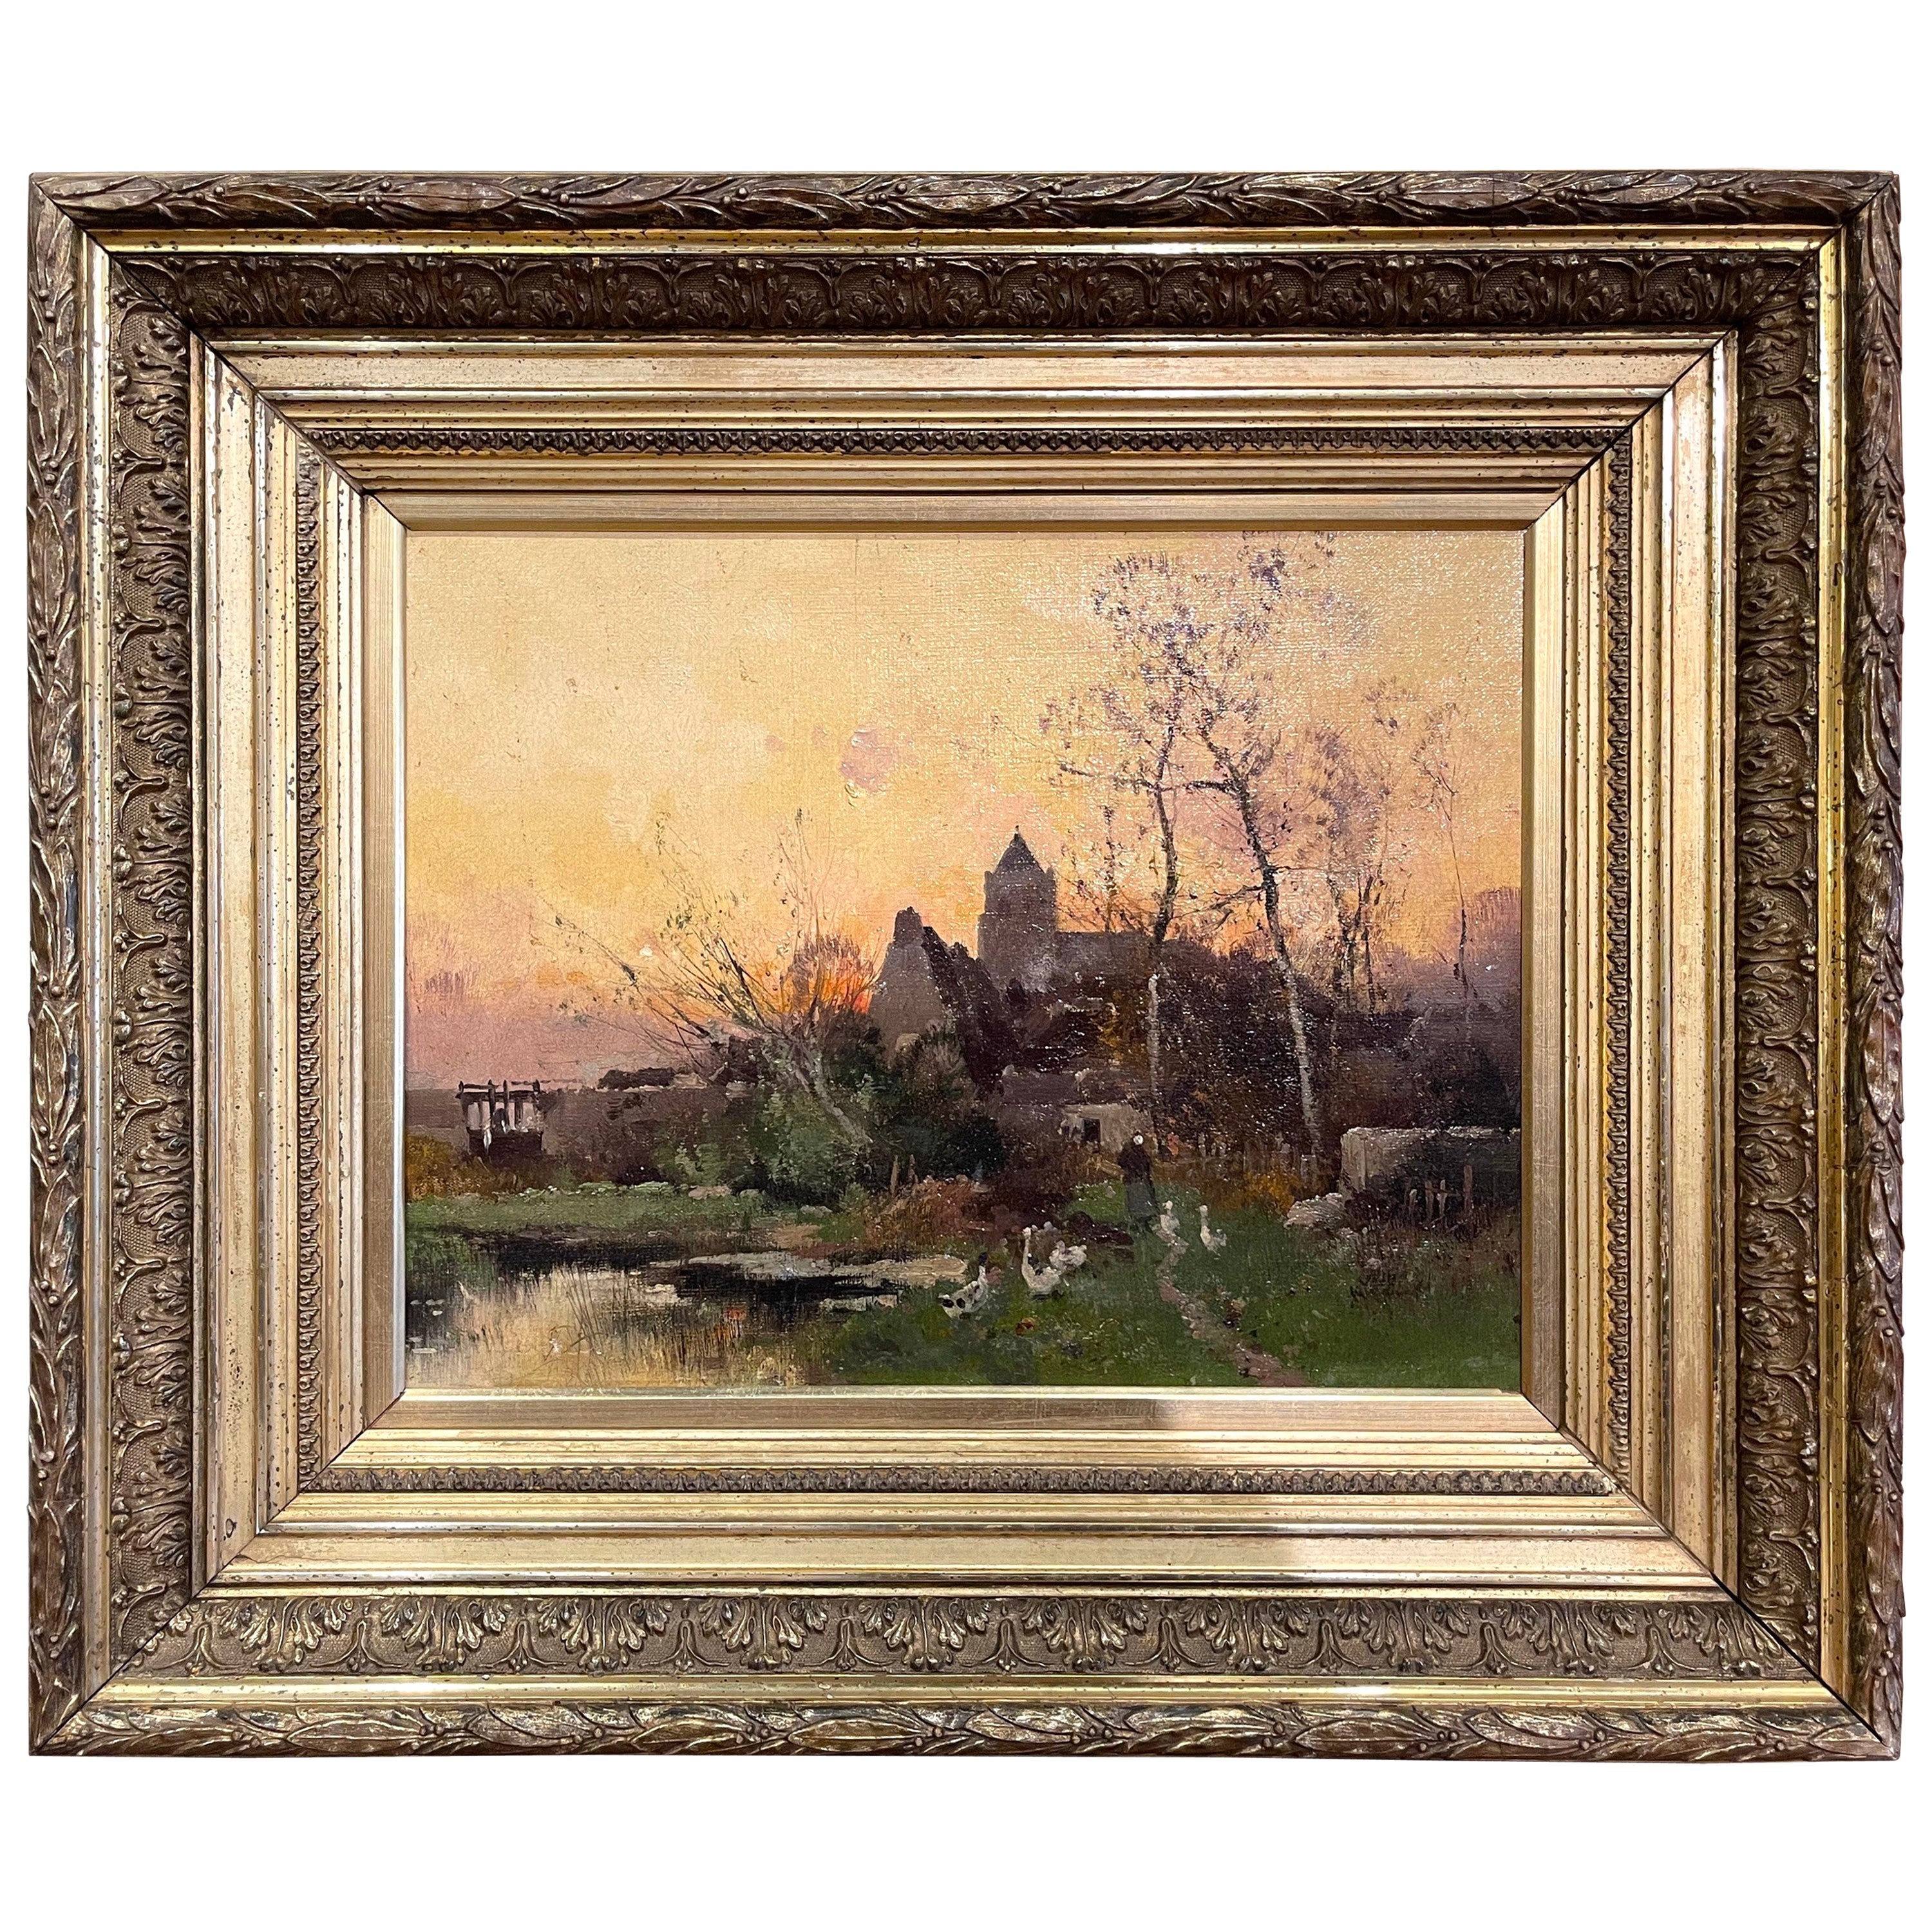 19th Century Pastoral Oil Painting in Carved Gilt Frame Signed E. Galien-Laloue